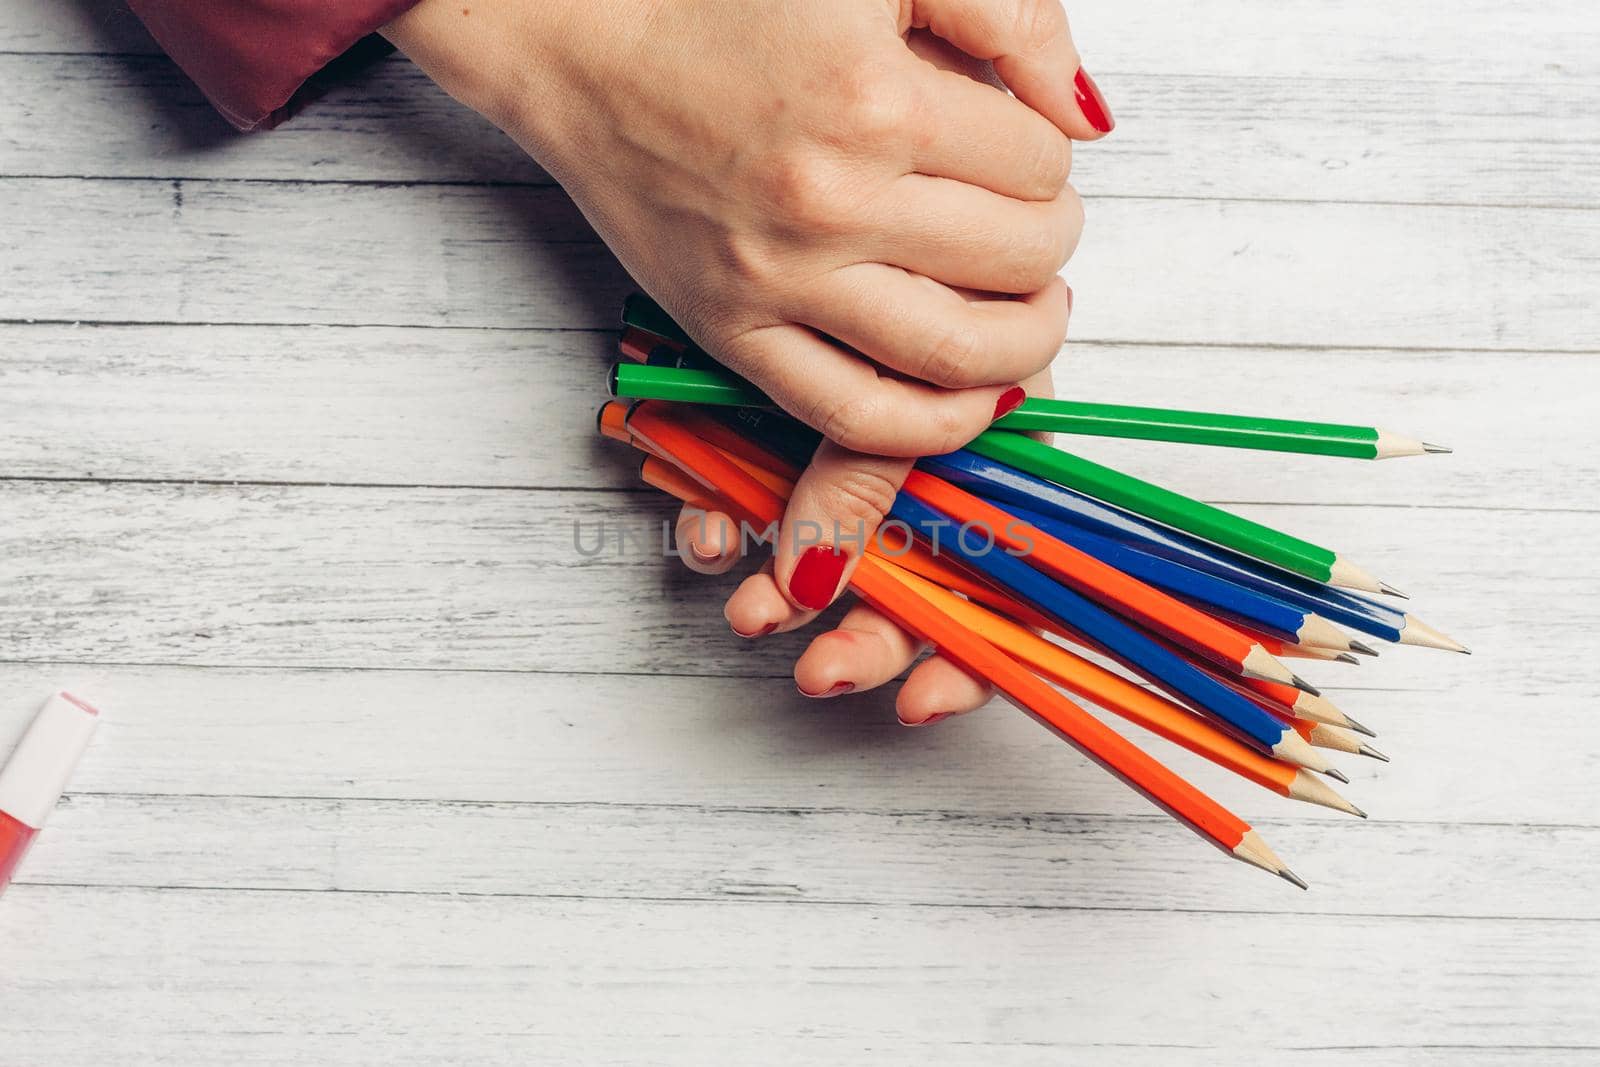 bright colored pencils in woman hands on wooden background cropped view by SHOTPRIME